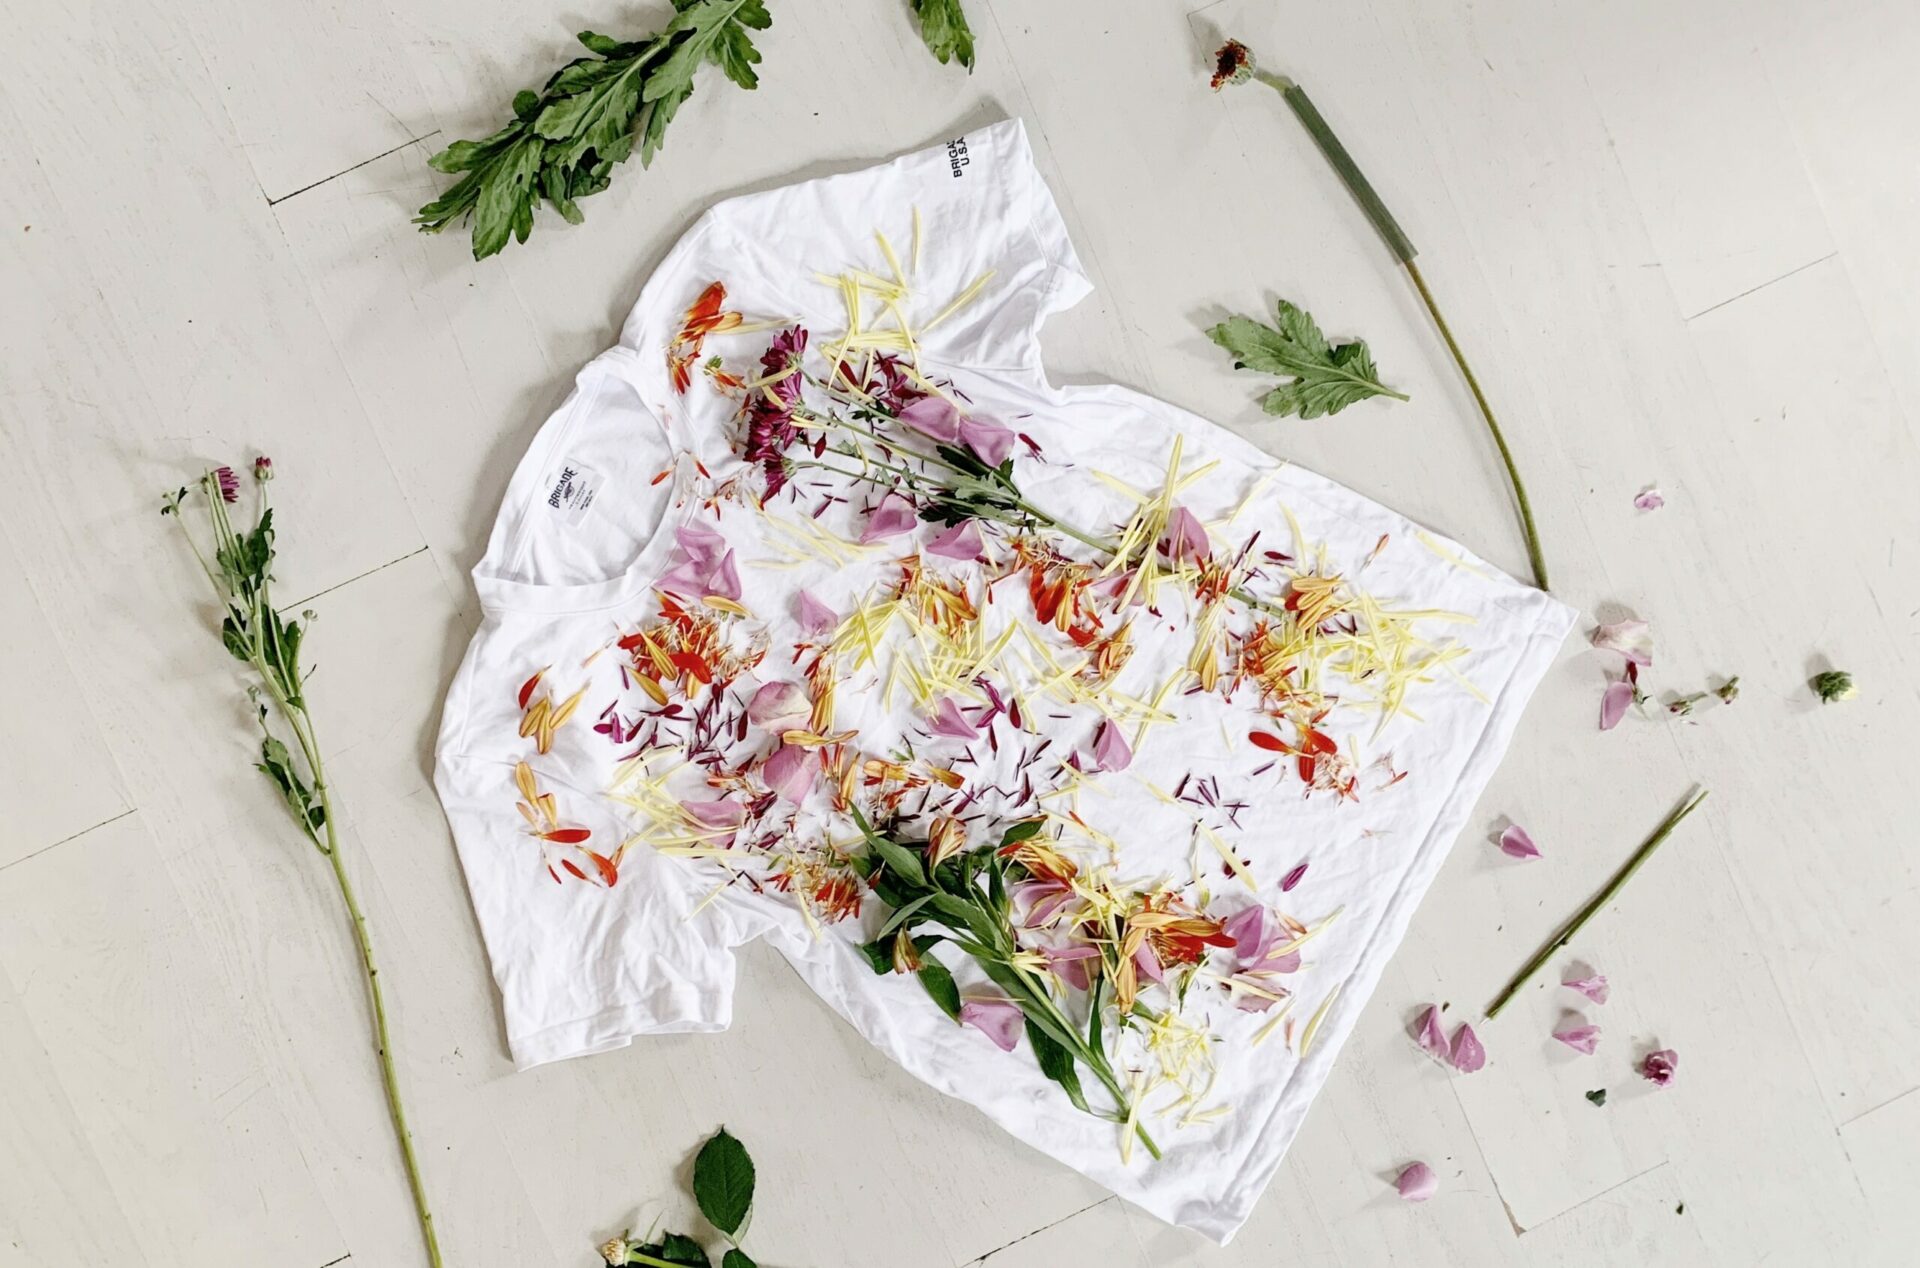 Get Creative with Flower Shirt DIY: A Step-by-Step Guide